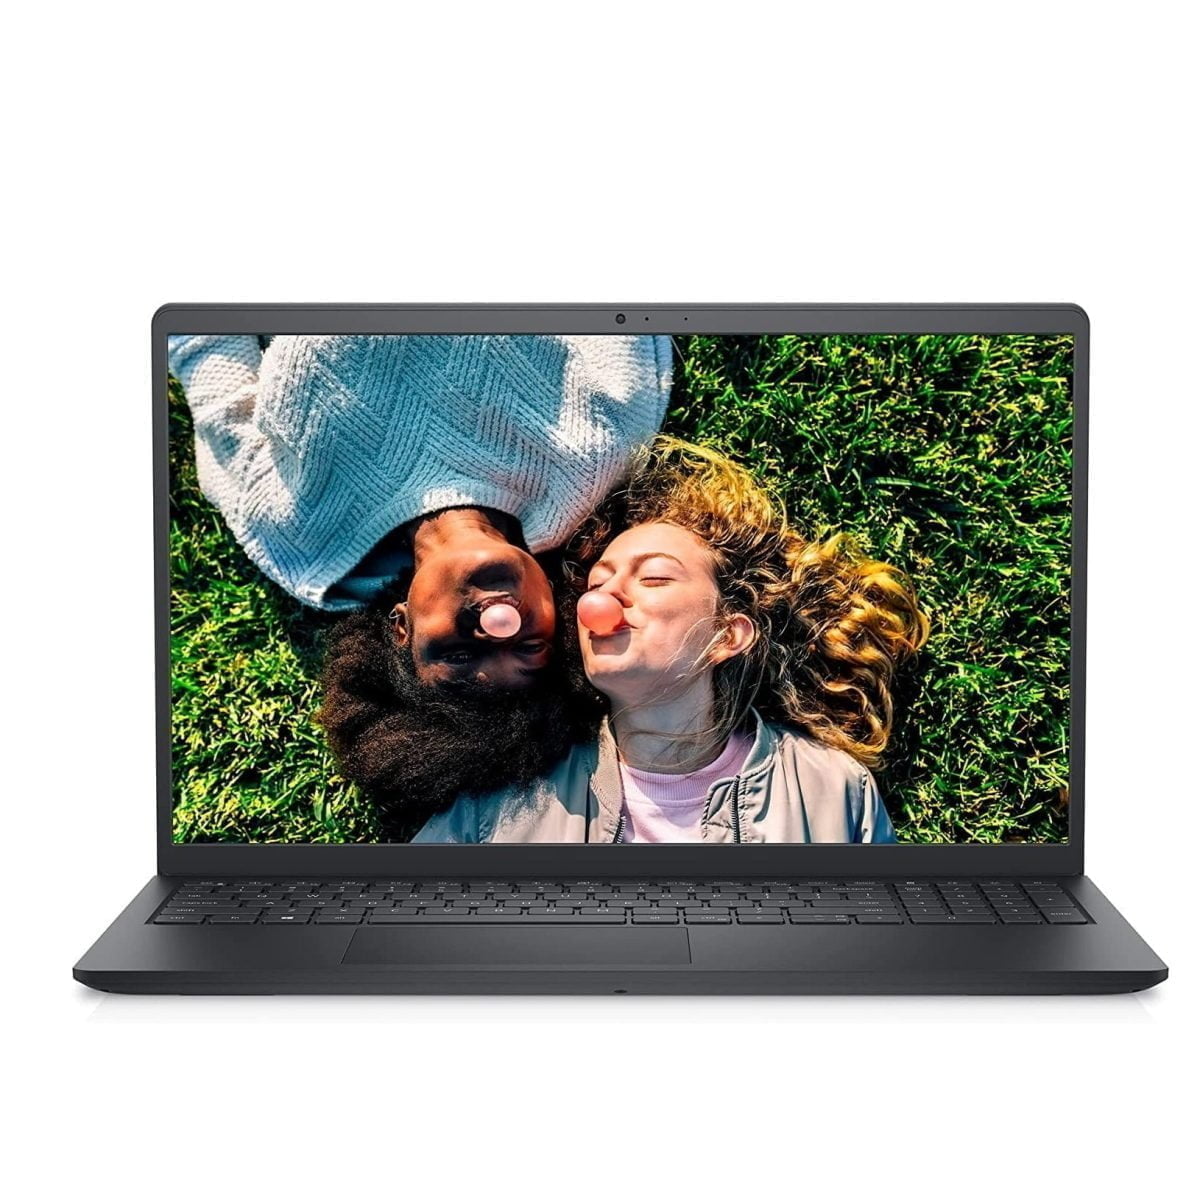 Dell &Lt;H1&Gt;Dell Inspiron 15 3511 - 15.6 Inch Fhd - Intel Core I5-1135G7, 8Gb Ram, 512Gb Ssd, 2Gb Mx350, Windows 10&Lt;/H1&Gt; &Lt;Ul Class=&Quot;A-Unordered-List A-Vertical A-Spacing-Mini&Quot;&Gt; &Lt;Li&Gt;&Lt;Span Class=&Quot;A-List-Item&Quot;&Gt;15.6-Inch Fhd (1920 X 1080) Anti-Glare Led Backlight Non-Touch Narrow Border Wva Display&Lt;/Span&Gt;&Lt;/Li&Gt; &Lt;Li&Gt;&Lt;Span Class=&Quot;A-List-Item&Quot;&Gt;11Th Generation Intel Core I5-1135G7 Processor (8Mb Cache, Up To 4.2 Ghz)&Lt;/Span&Gt;&Lt;/Li&Gt; &Lt;Li&Gt;&Lt;Span Class=&Quot;A-List-Item&Quot;&Gt;8Gb Ram, 512Gb  Solid State Drive&Lt;/Span&Gt;&Lt;/Li&Gt; &Lt;Li&Gt;2Gb Mx350 Graphics Memory&Lt;/Li&Gt; &Lt;Li&Gt;&Lt;Span Class=&Quot;A-List-Item&Quot;&Gt;802.11Ac 1X1 Wifi + Bluetooth 5.0&Lt;/Span&Gt;&Lt;/Li&Gt; &Lt;/Ul&Gt; &Lt;Pre&Gt;One Year Warranty&Lt;/Pre&Gt; Dell Inspiron Dell Inspiron 3511-15.6 Inch Fhd, Core I5-1135G7, 8Gb Ram, 512Gb Ssd, Windows 10